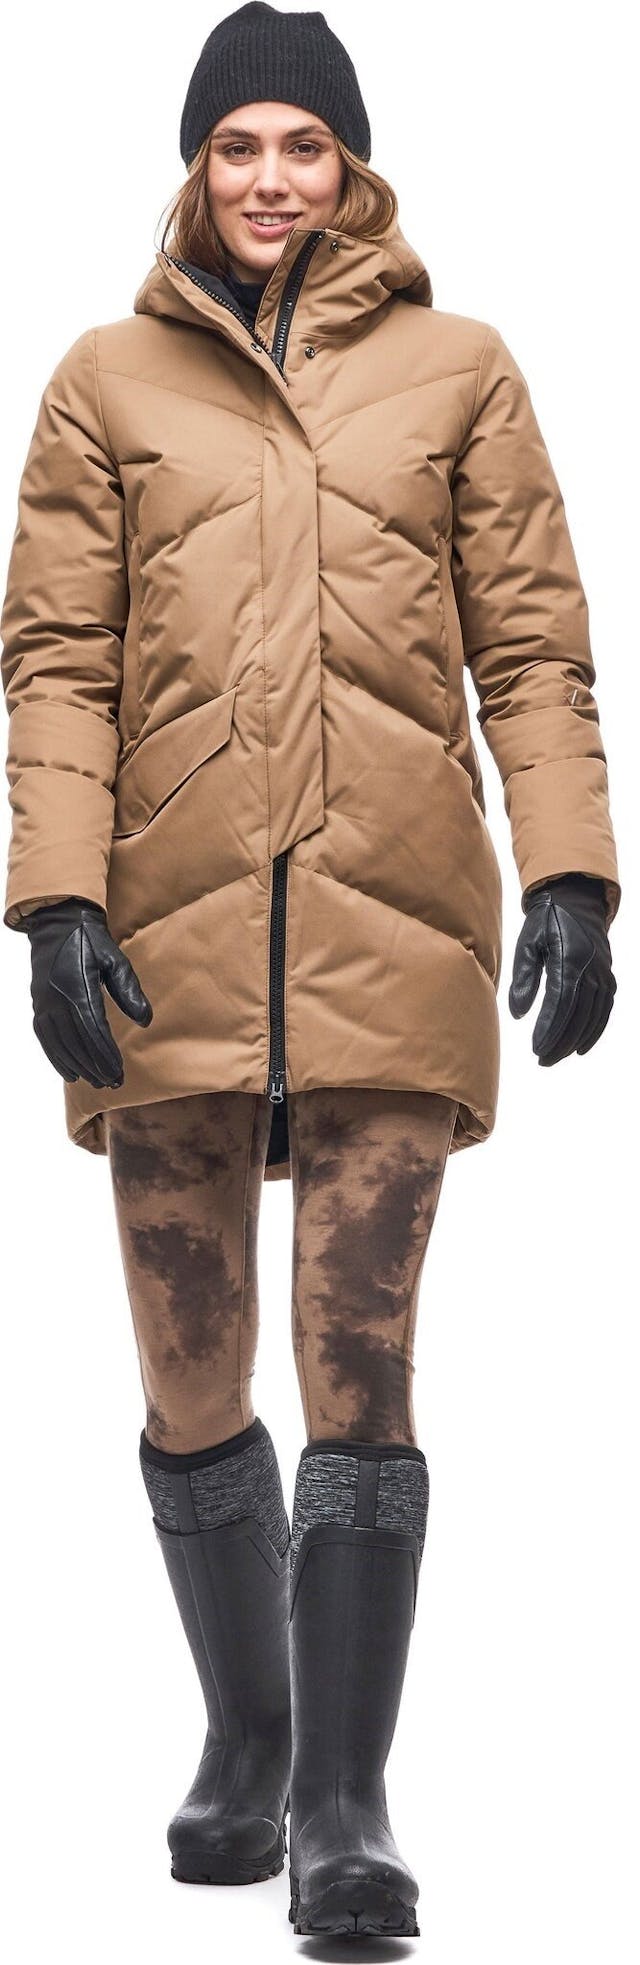 Product image for Ayaba Simplified Mid Length Down Jacket - Women's